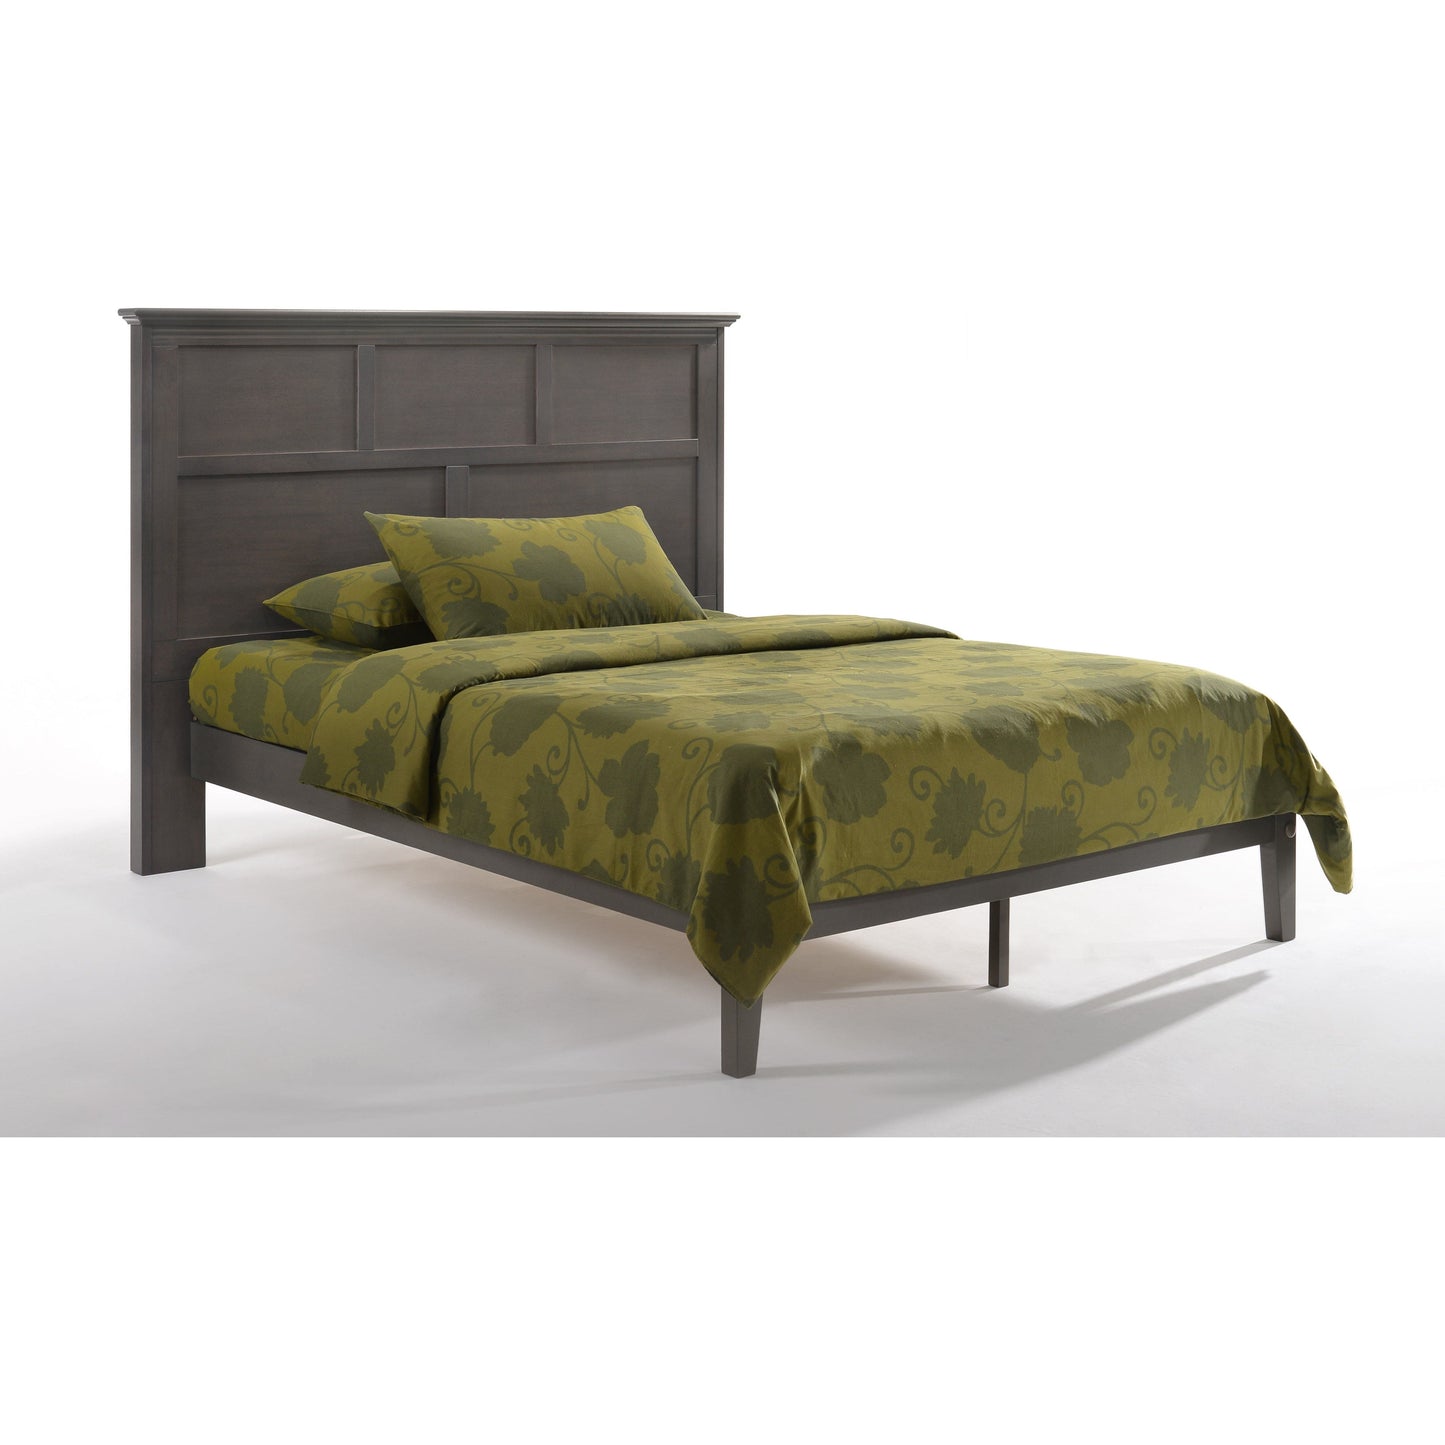 Night And Day Queen Tarragon Bed Frame (P Series) in cherry finish Stonewash TAR-PH-QEN-STW-COM